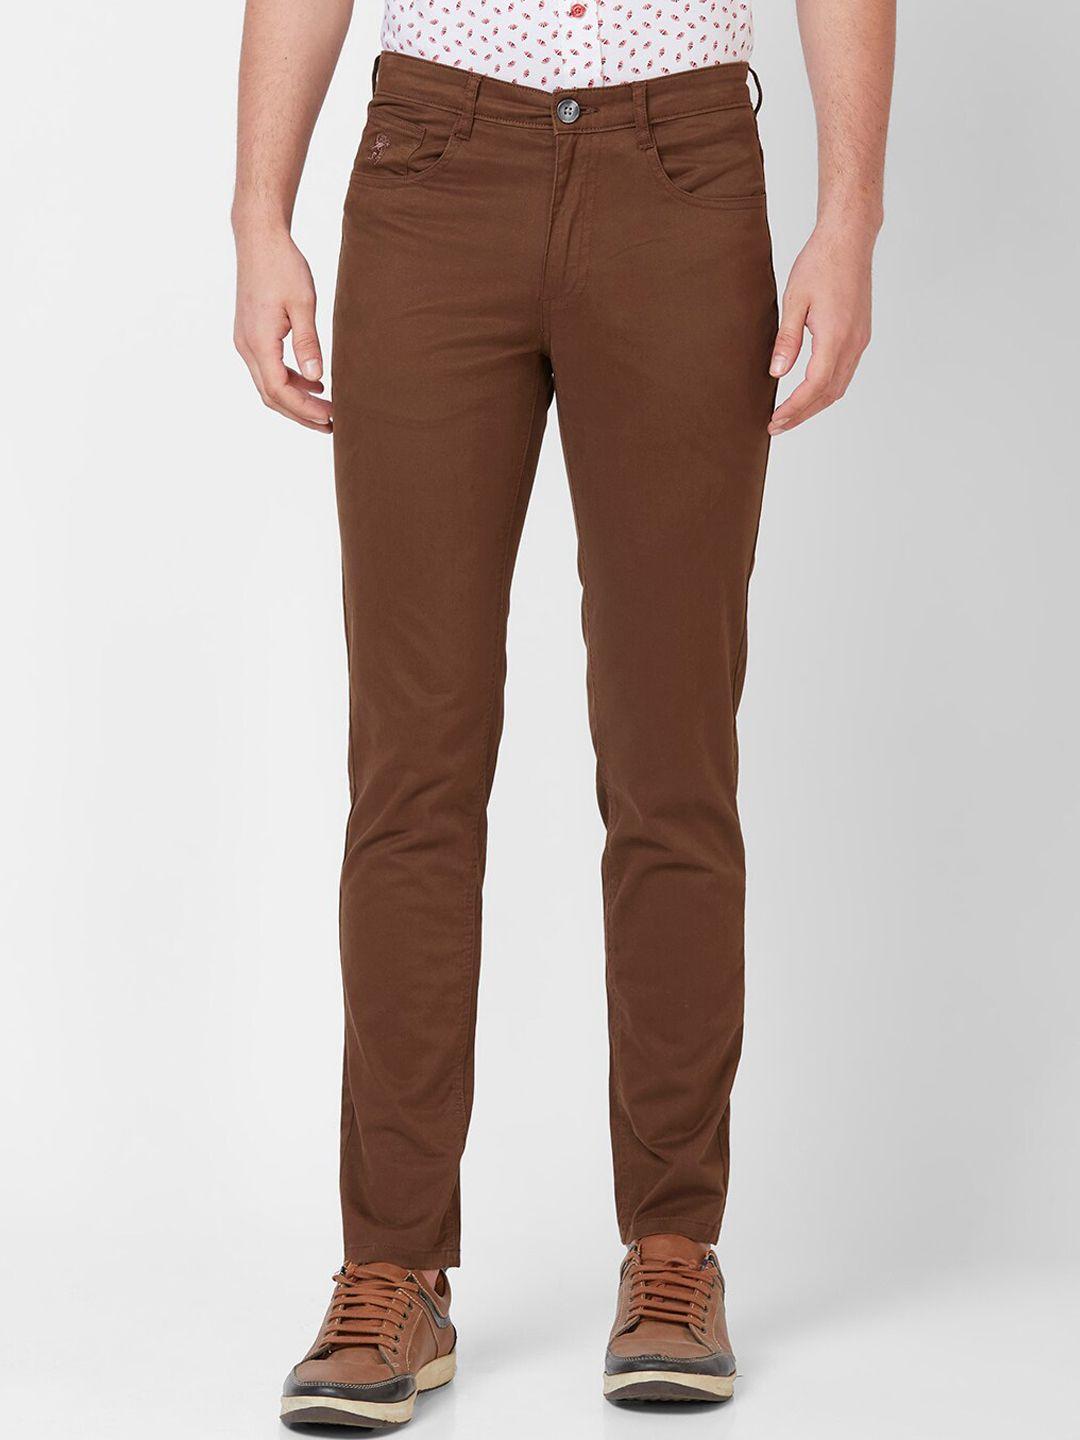 giordano men brown slim fit chinos trousers